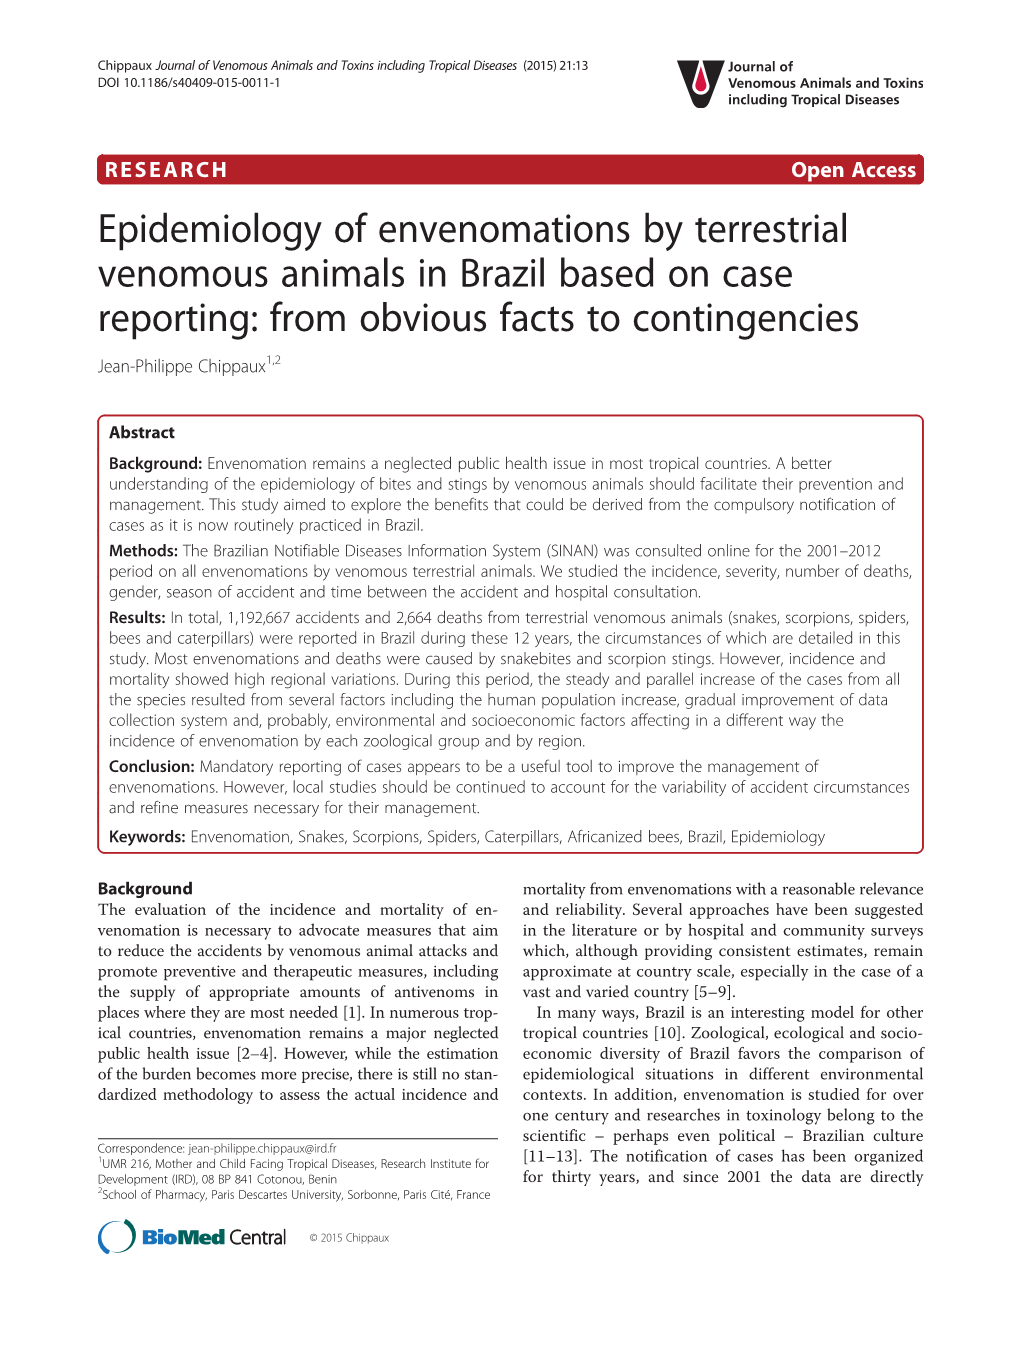 Epidemiology of Envenomations by Terrestrial Venomous Animals in Brazil Based on Case Reporting: from Obvious Facts to Contingencies Jean-Philippe Chippaux1,2